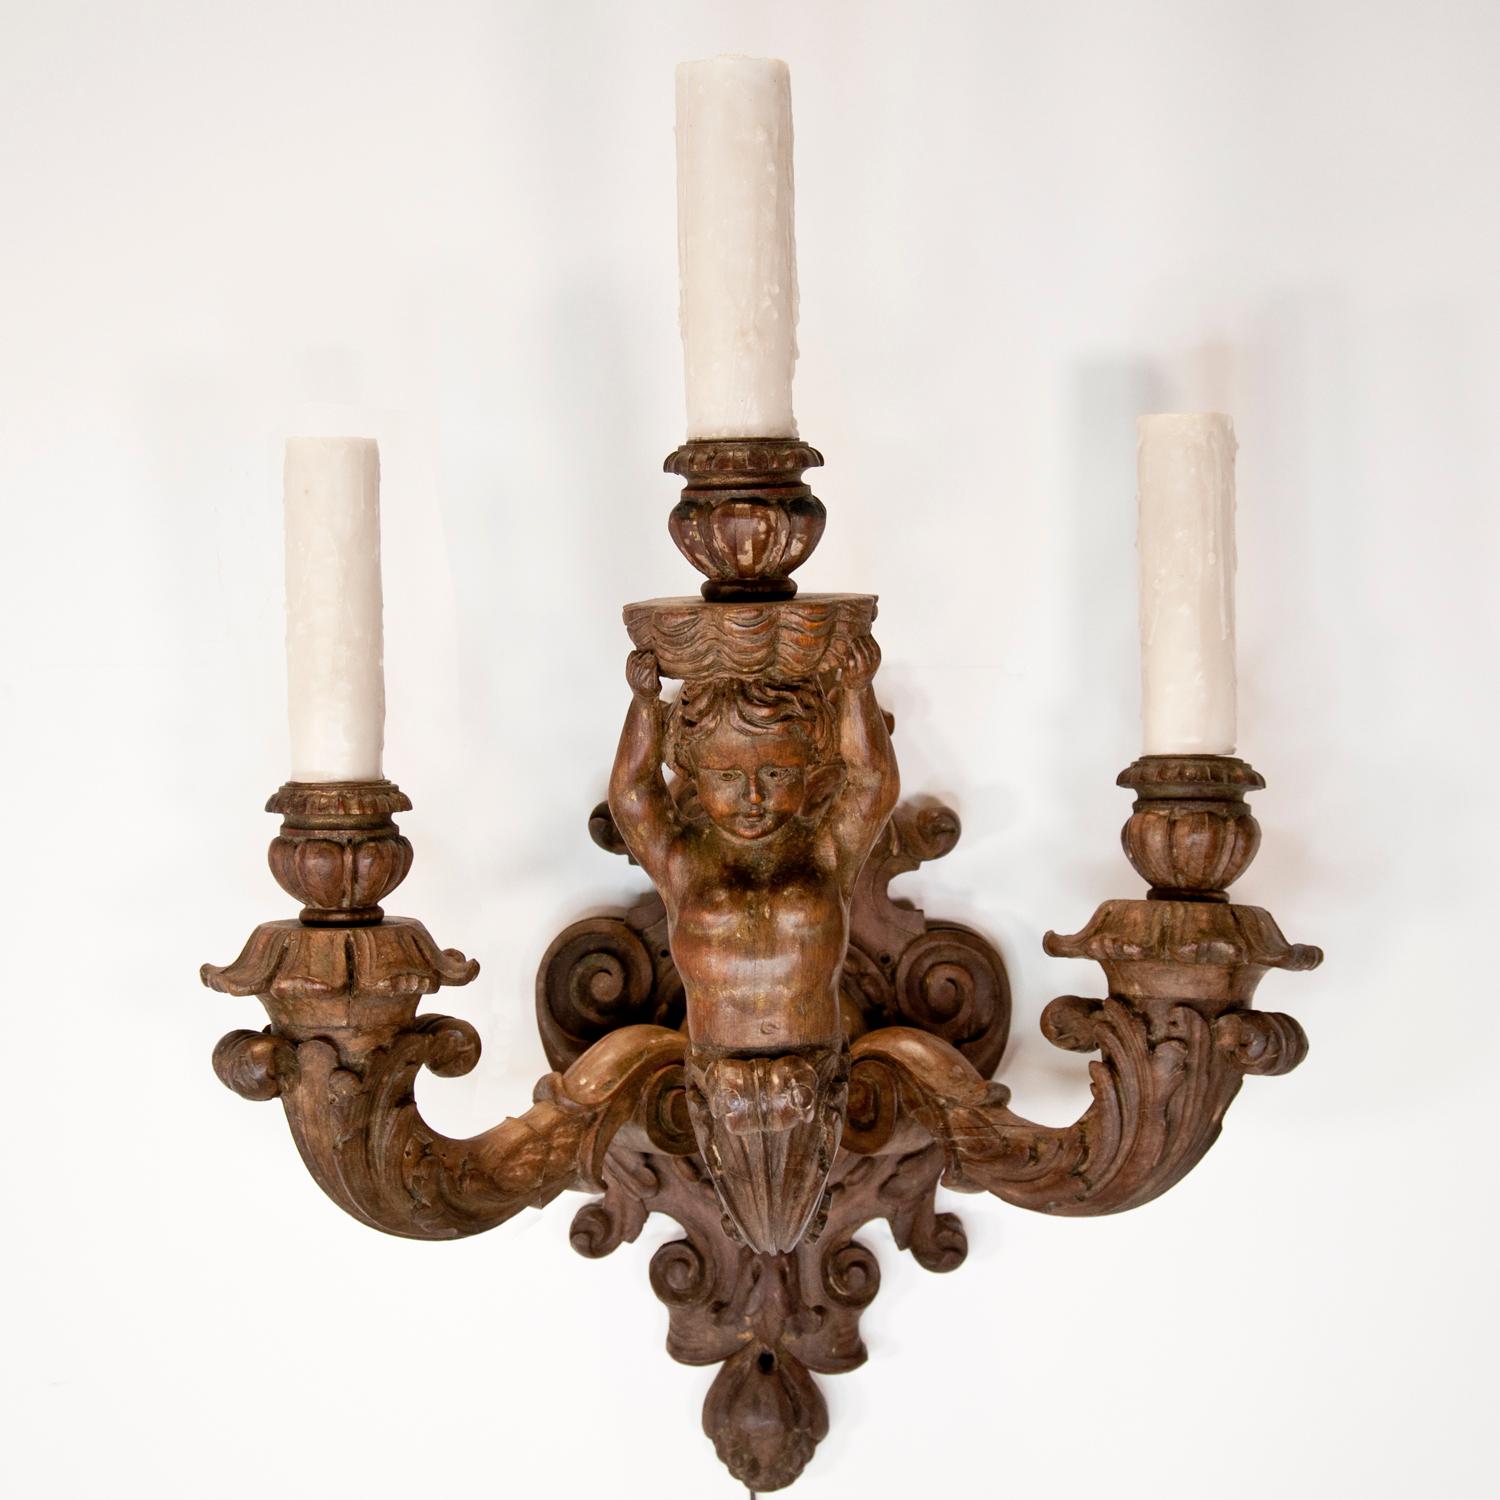 A pair of vintage late 19th or early 20th century Baroque style carved wood sconces, featuring three arms with cherubs holding a candlestick. Electrified. A unique feature is the wax candle tubes over the electrical light sockets.








  